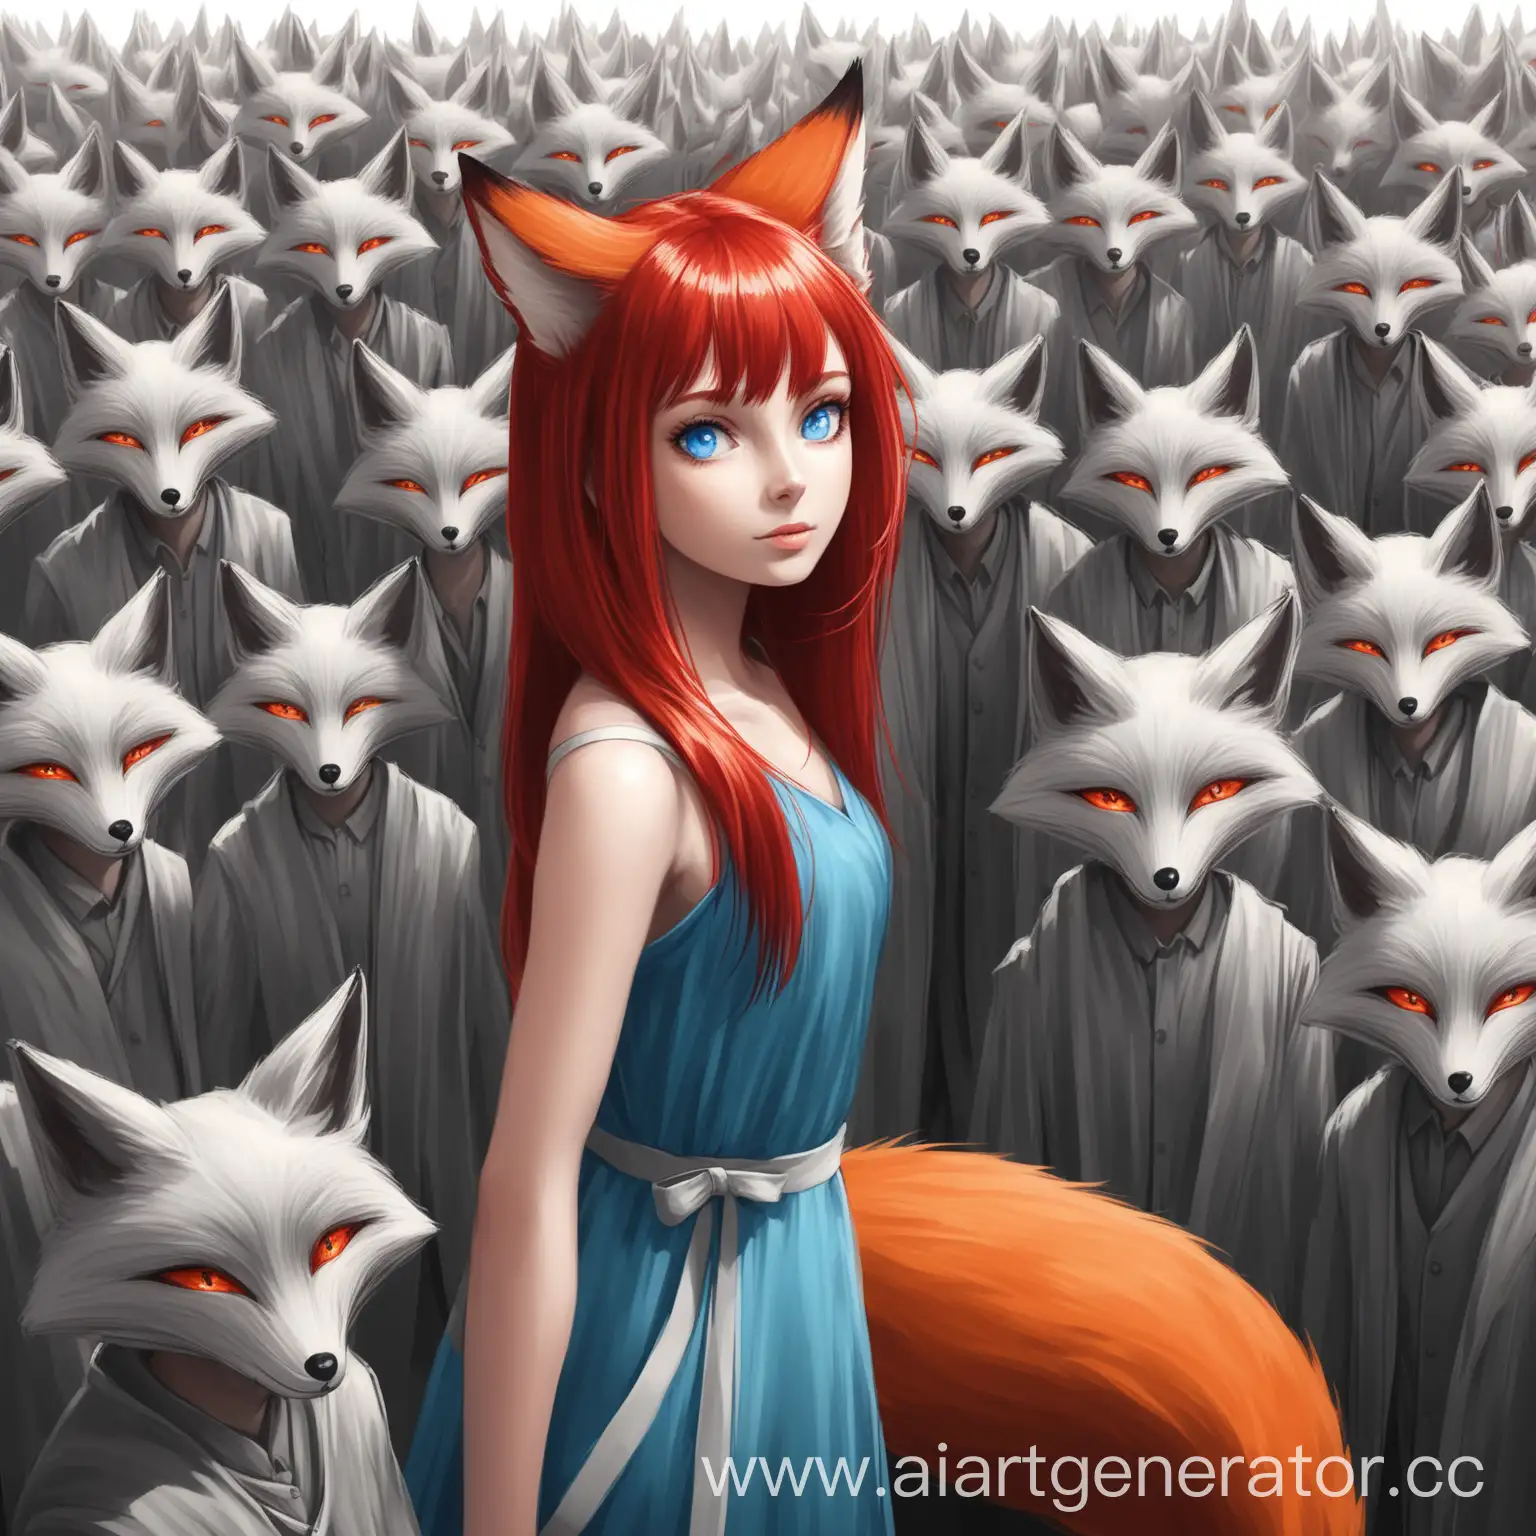 RedHaired-Girl-with-Fox-Tail-Among-Gray-Figures